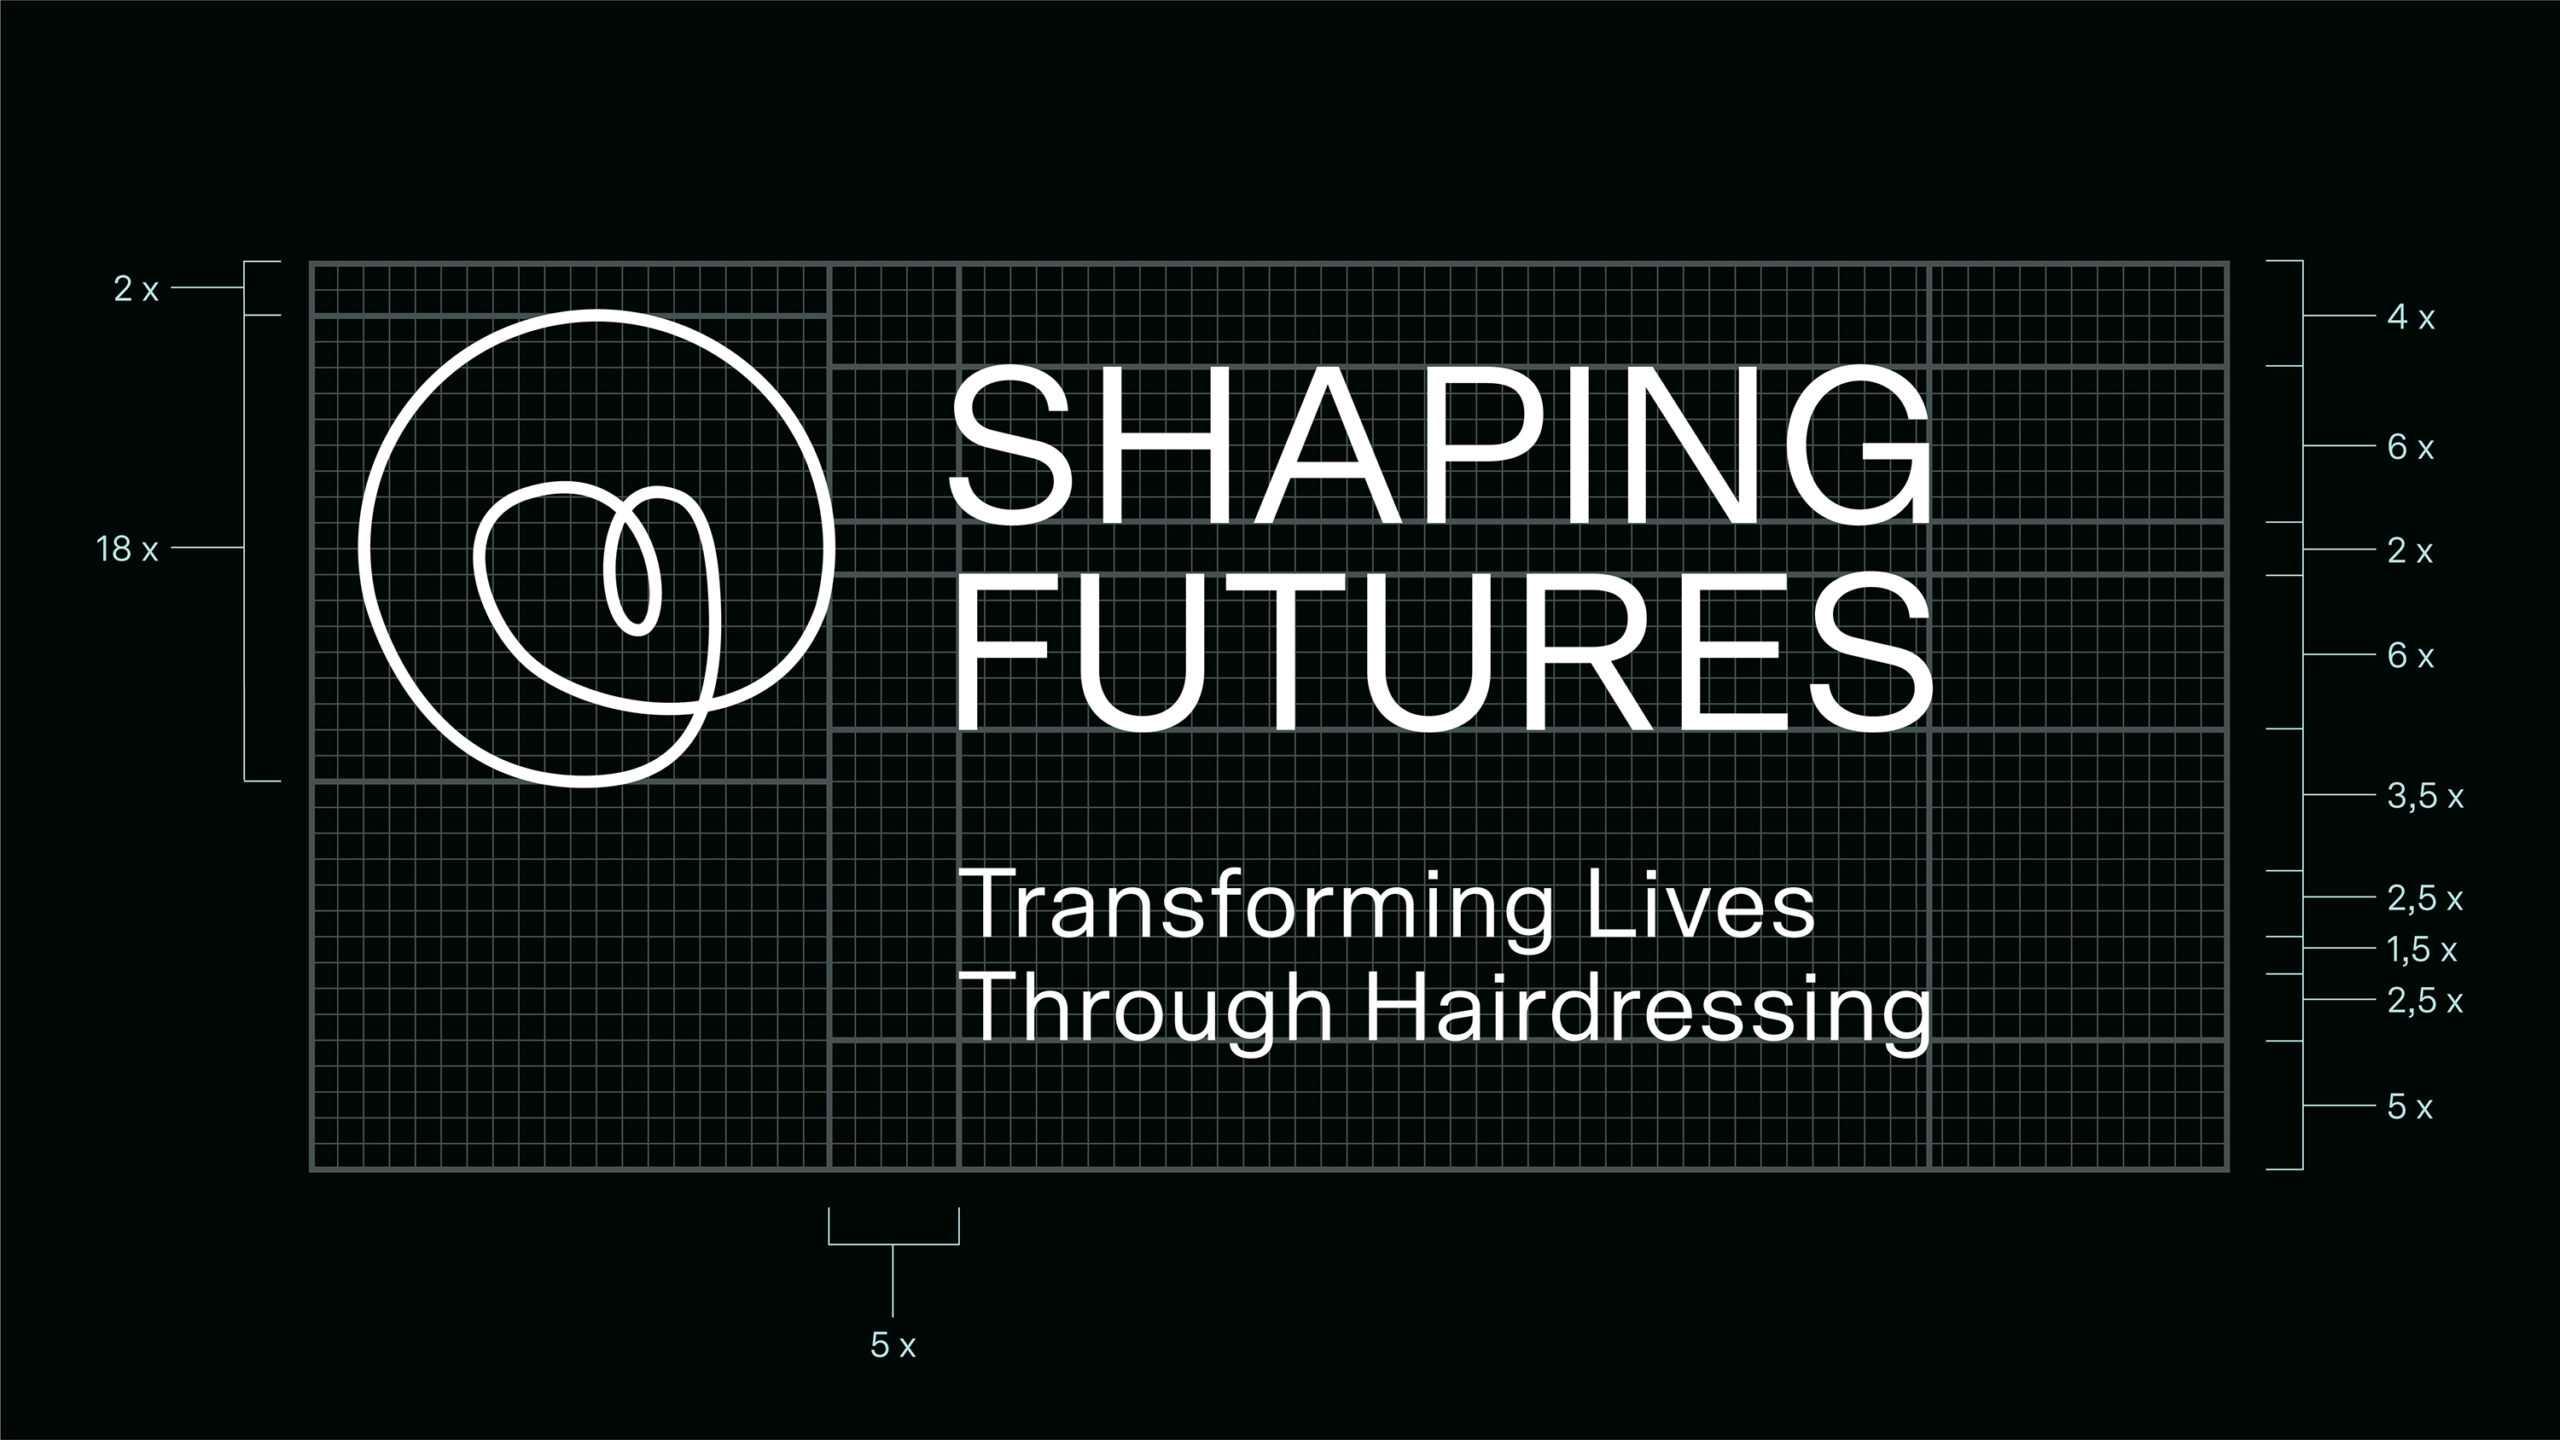 graphic displaying the construction of the shaping future logo and claim